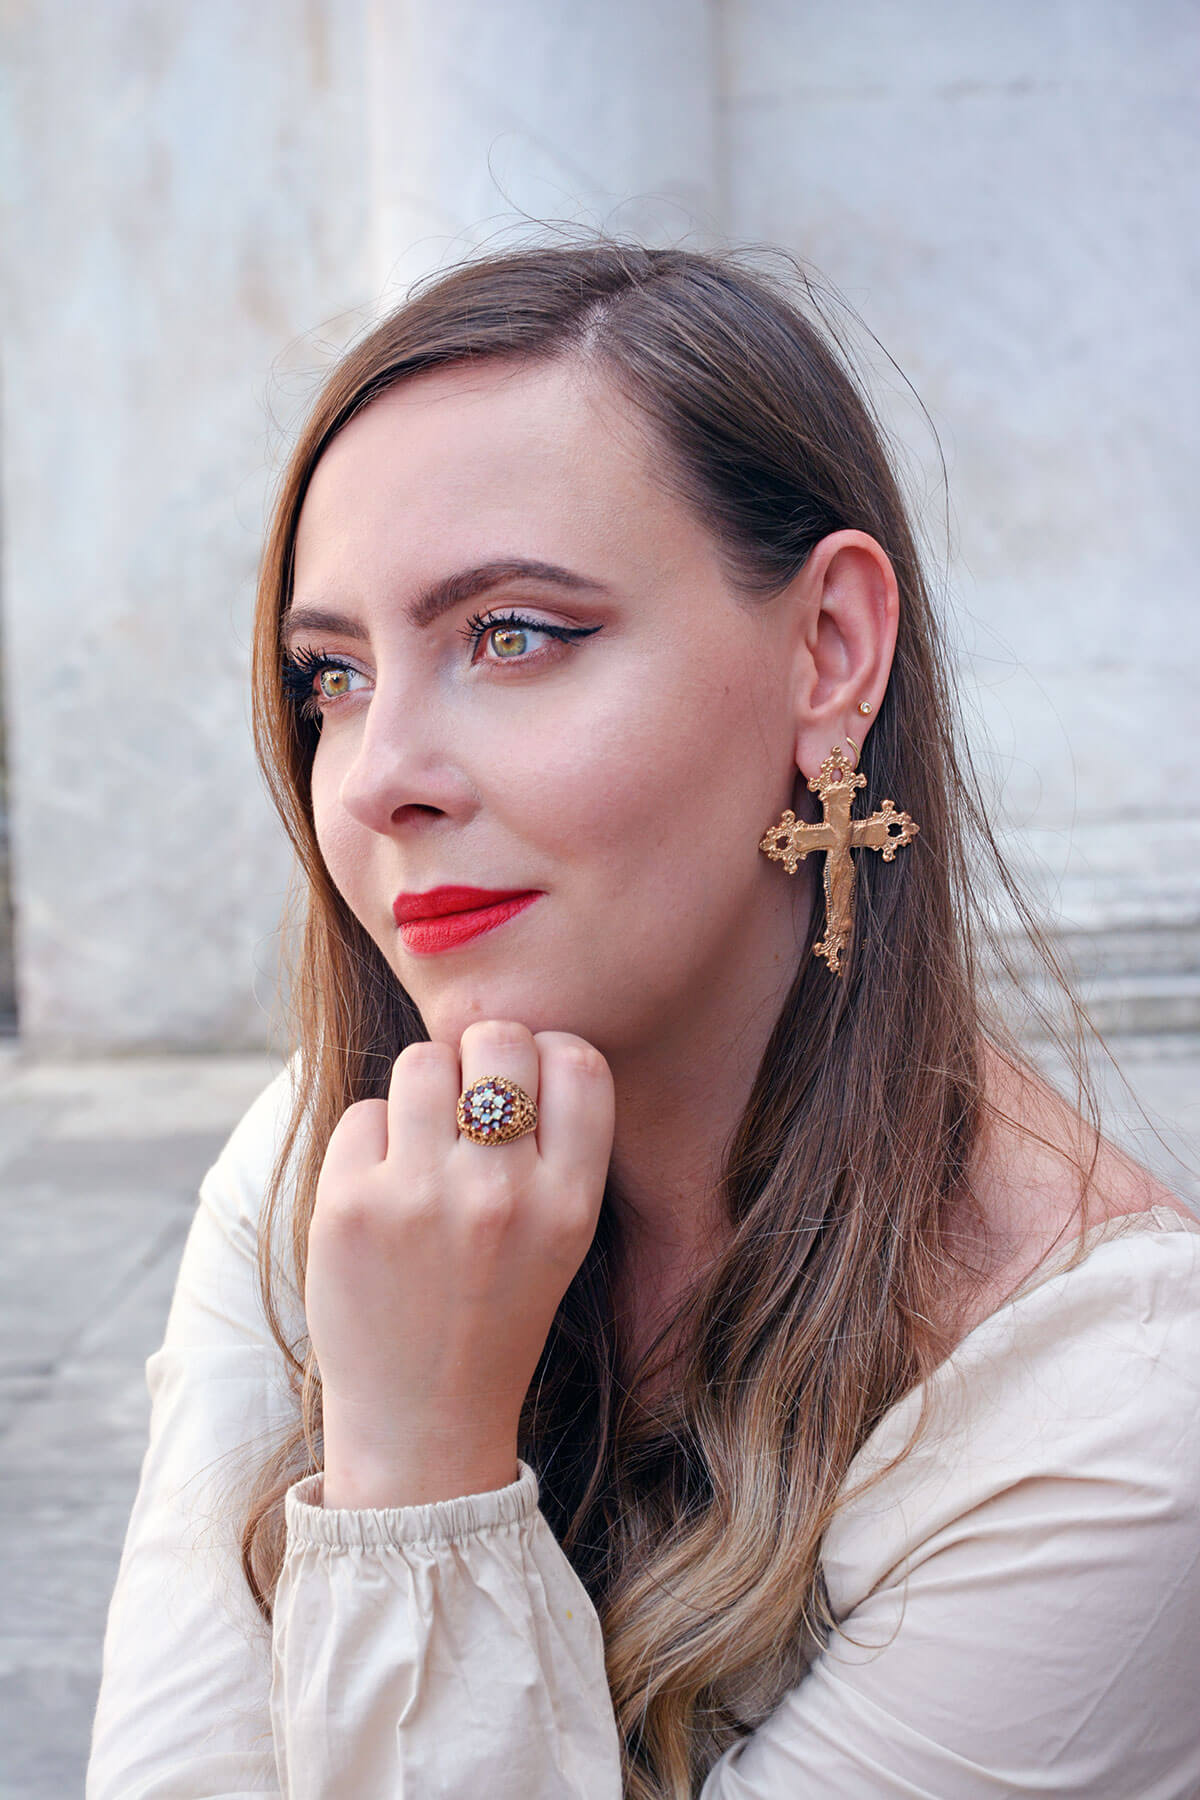 Jewellery influencer wearing cross earrings and rose gold jewellery